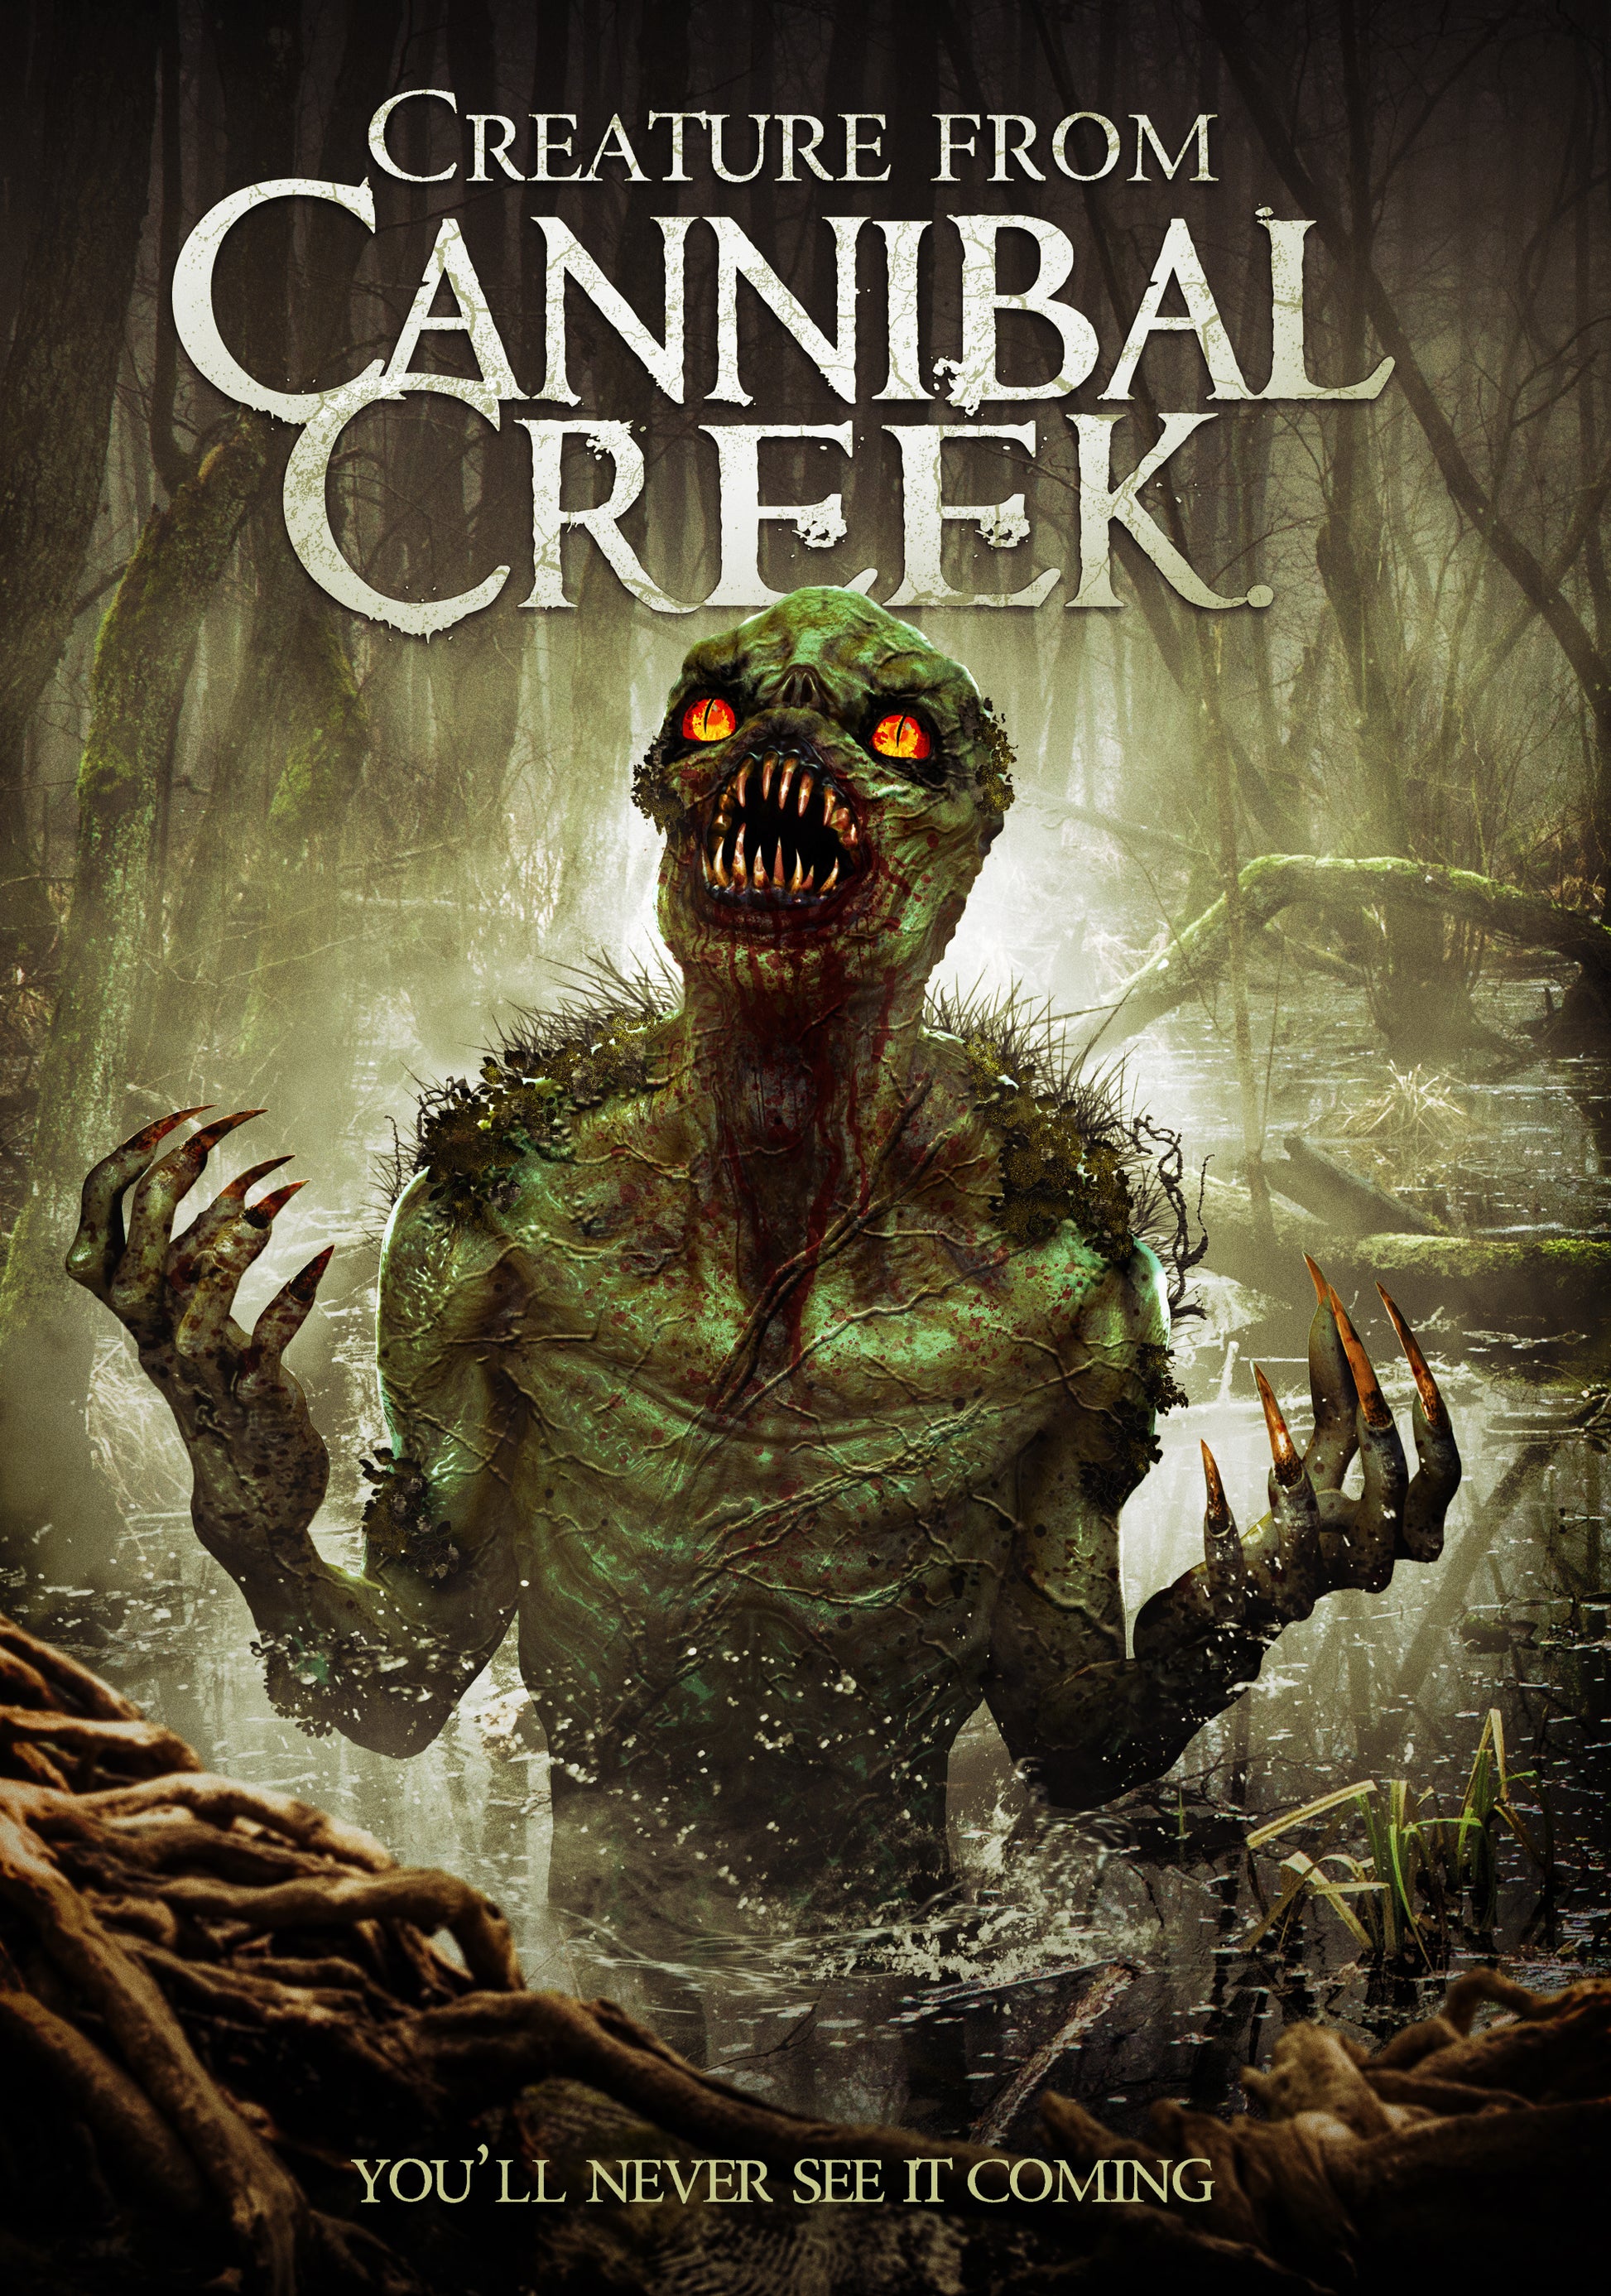 Creature from Cannibal Creek cover art